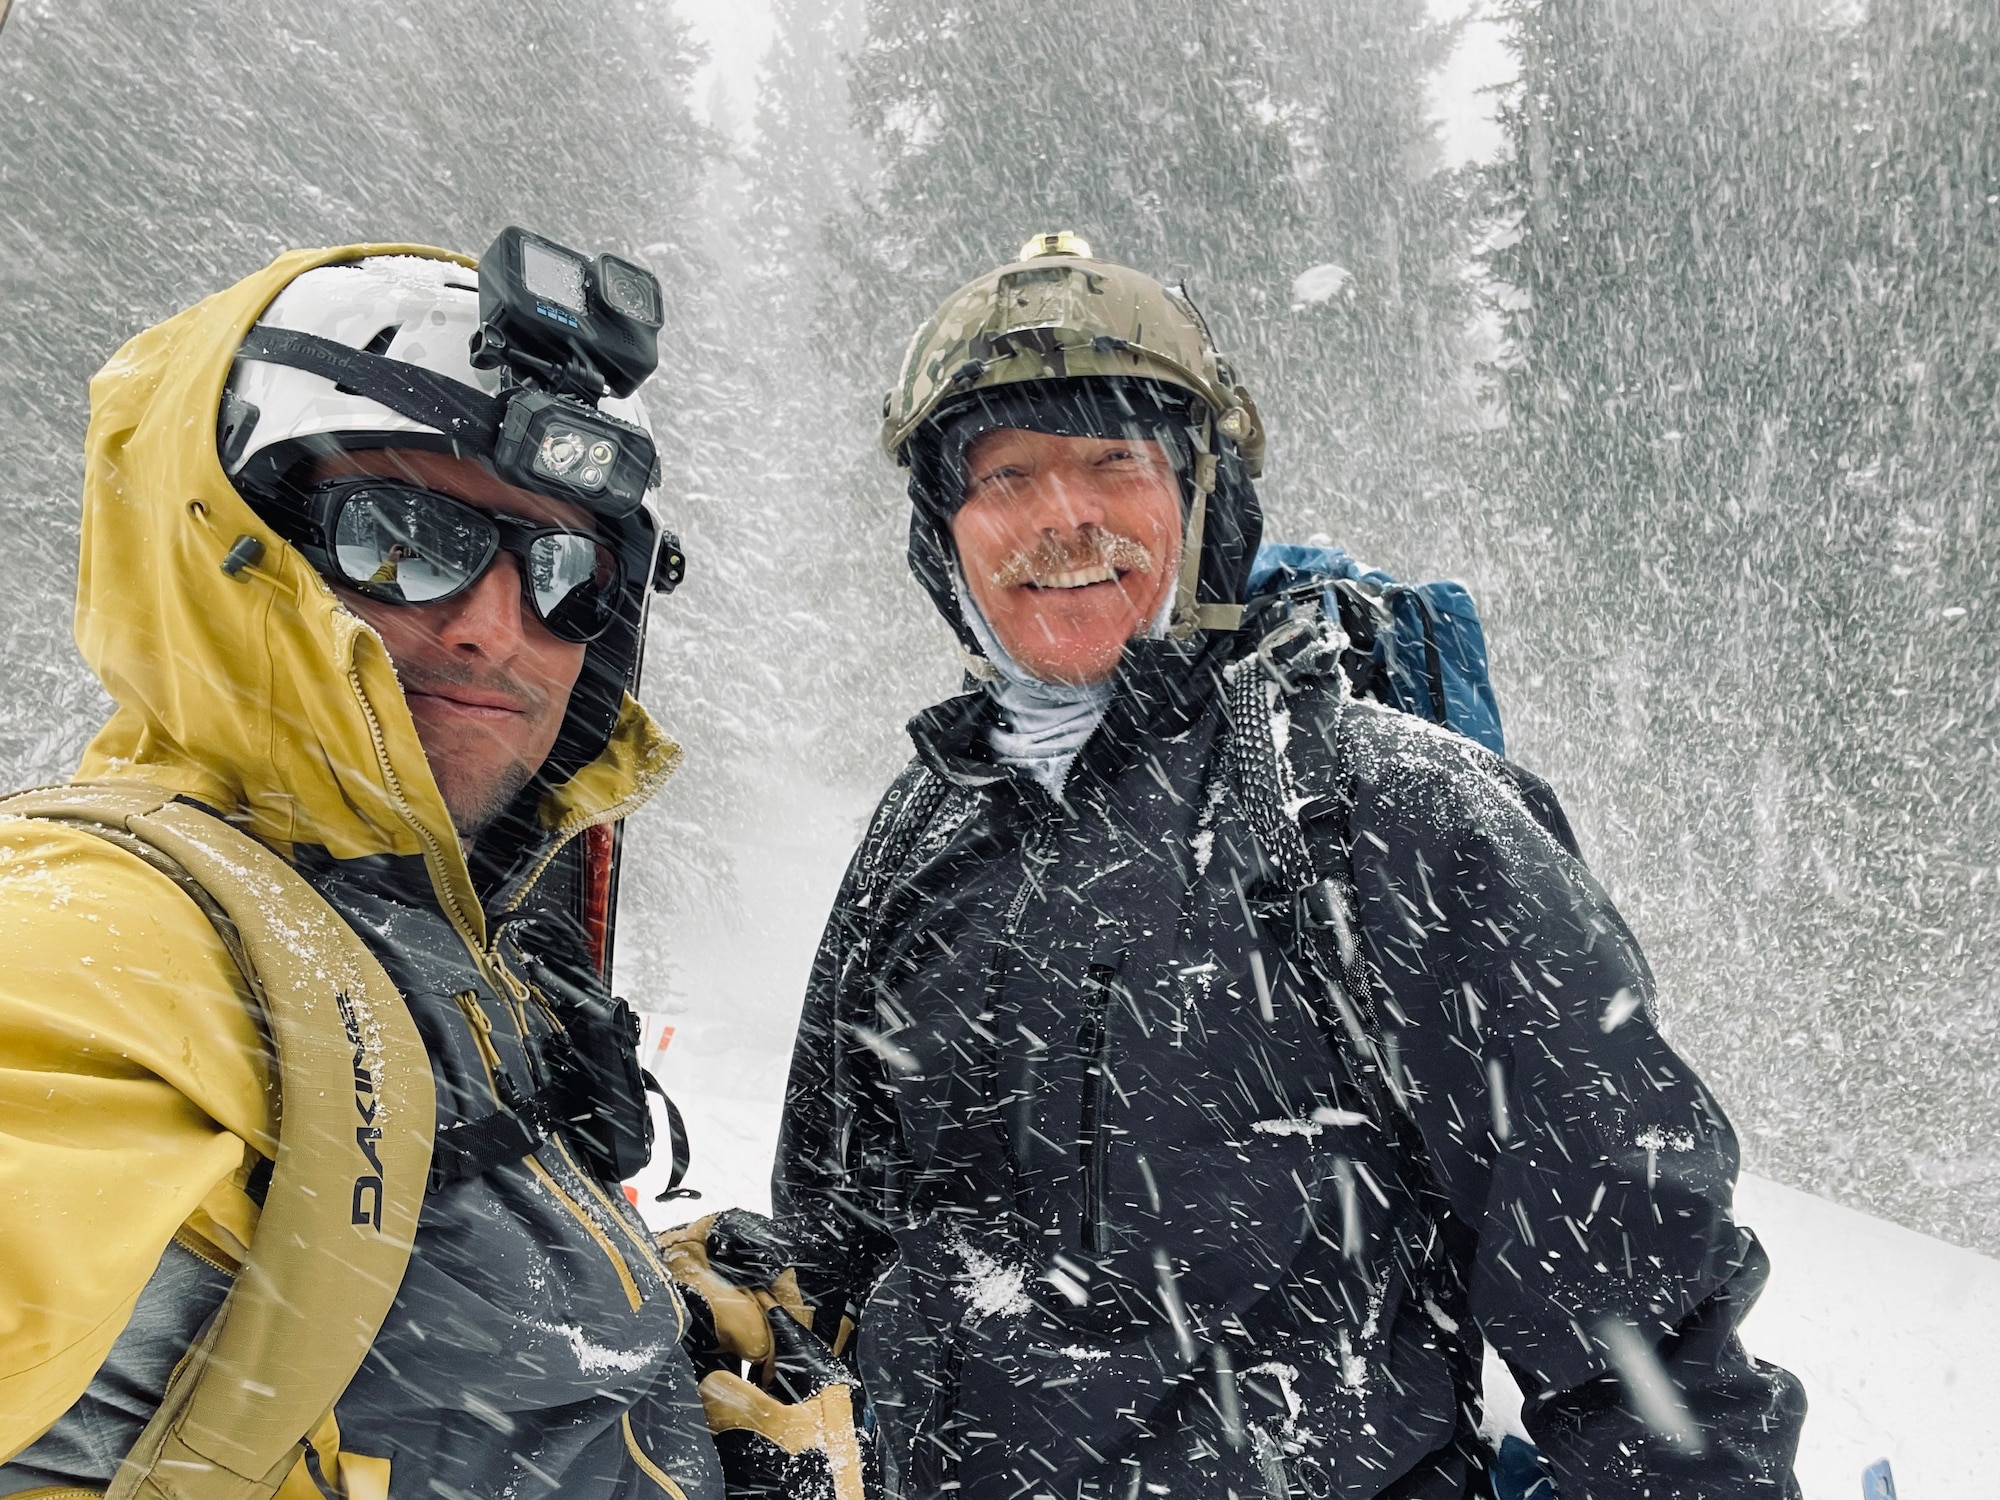 Two men pose for a picture in the snow